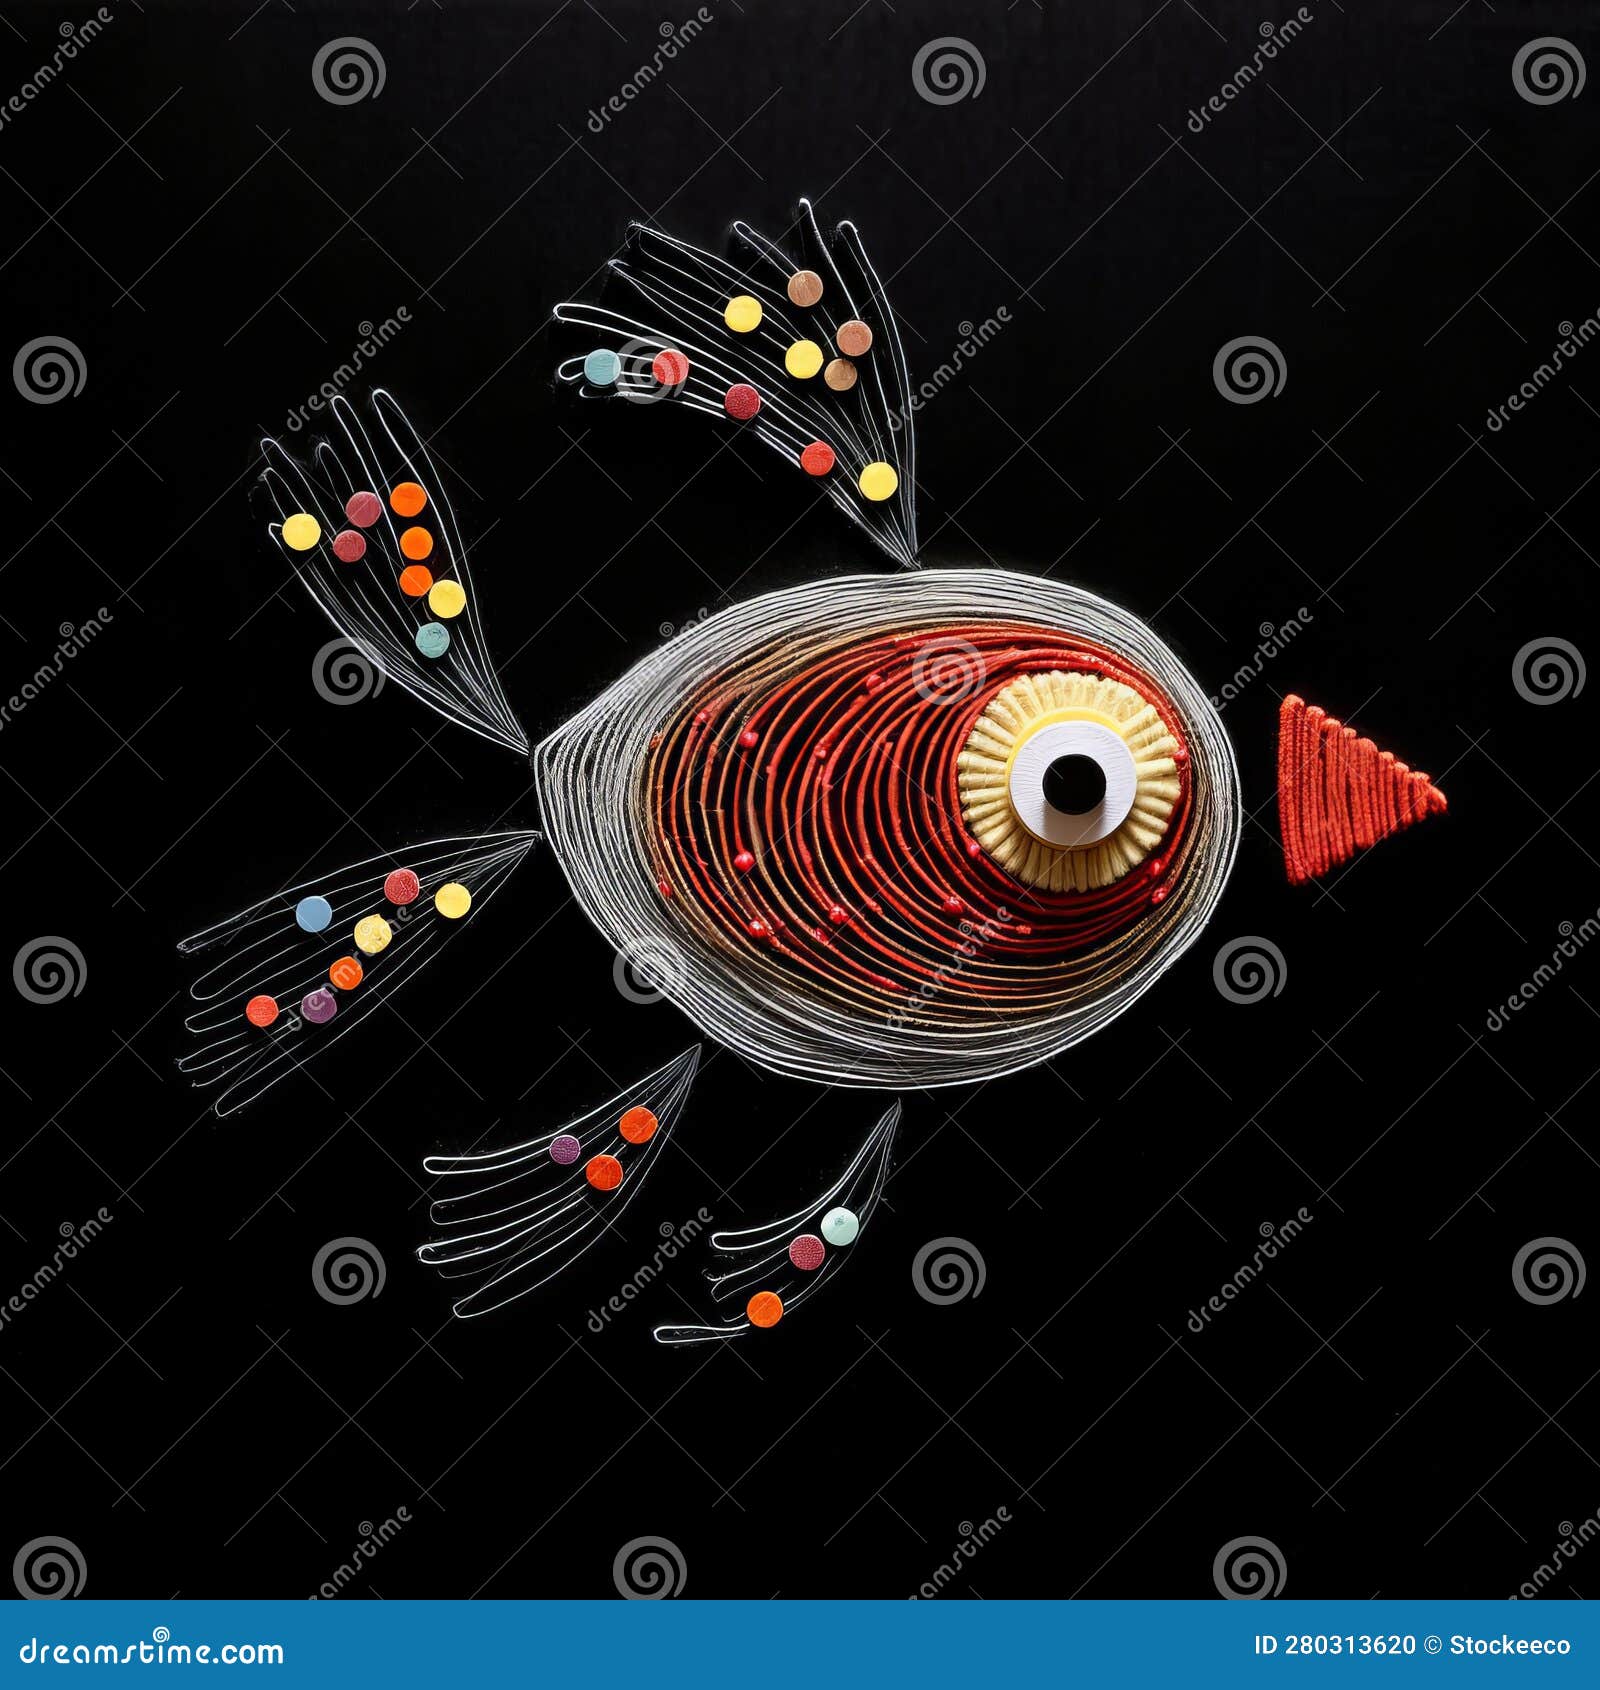 https://thumbs.dreamstime.com/z/stunning-wire-sculpture-colorful-fish-black-background-showcased-hrnn-sweden-sculpture-created-style-280313620.jpg